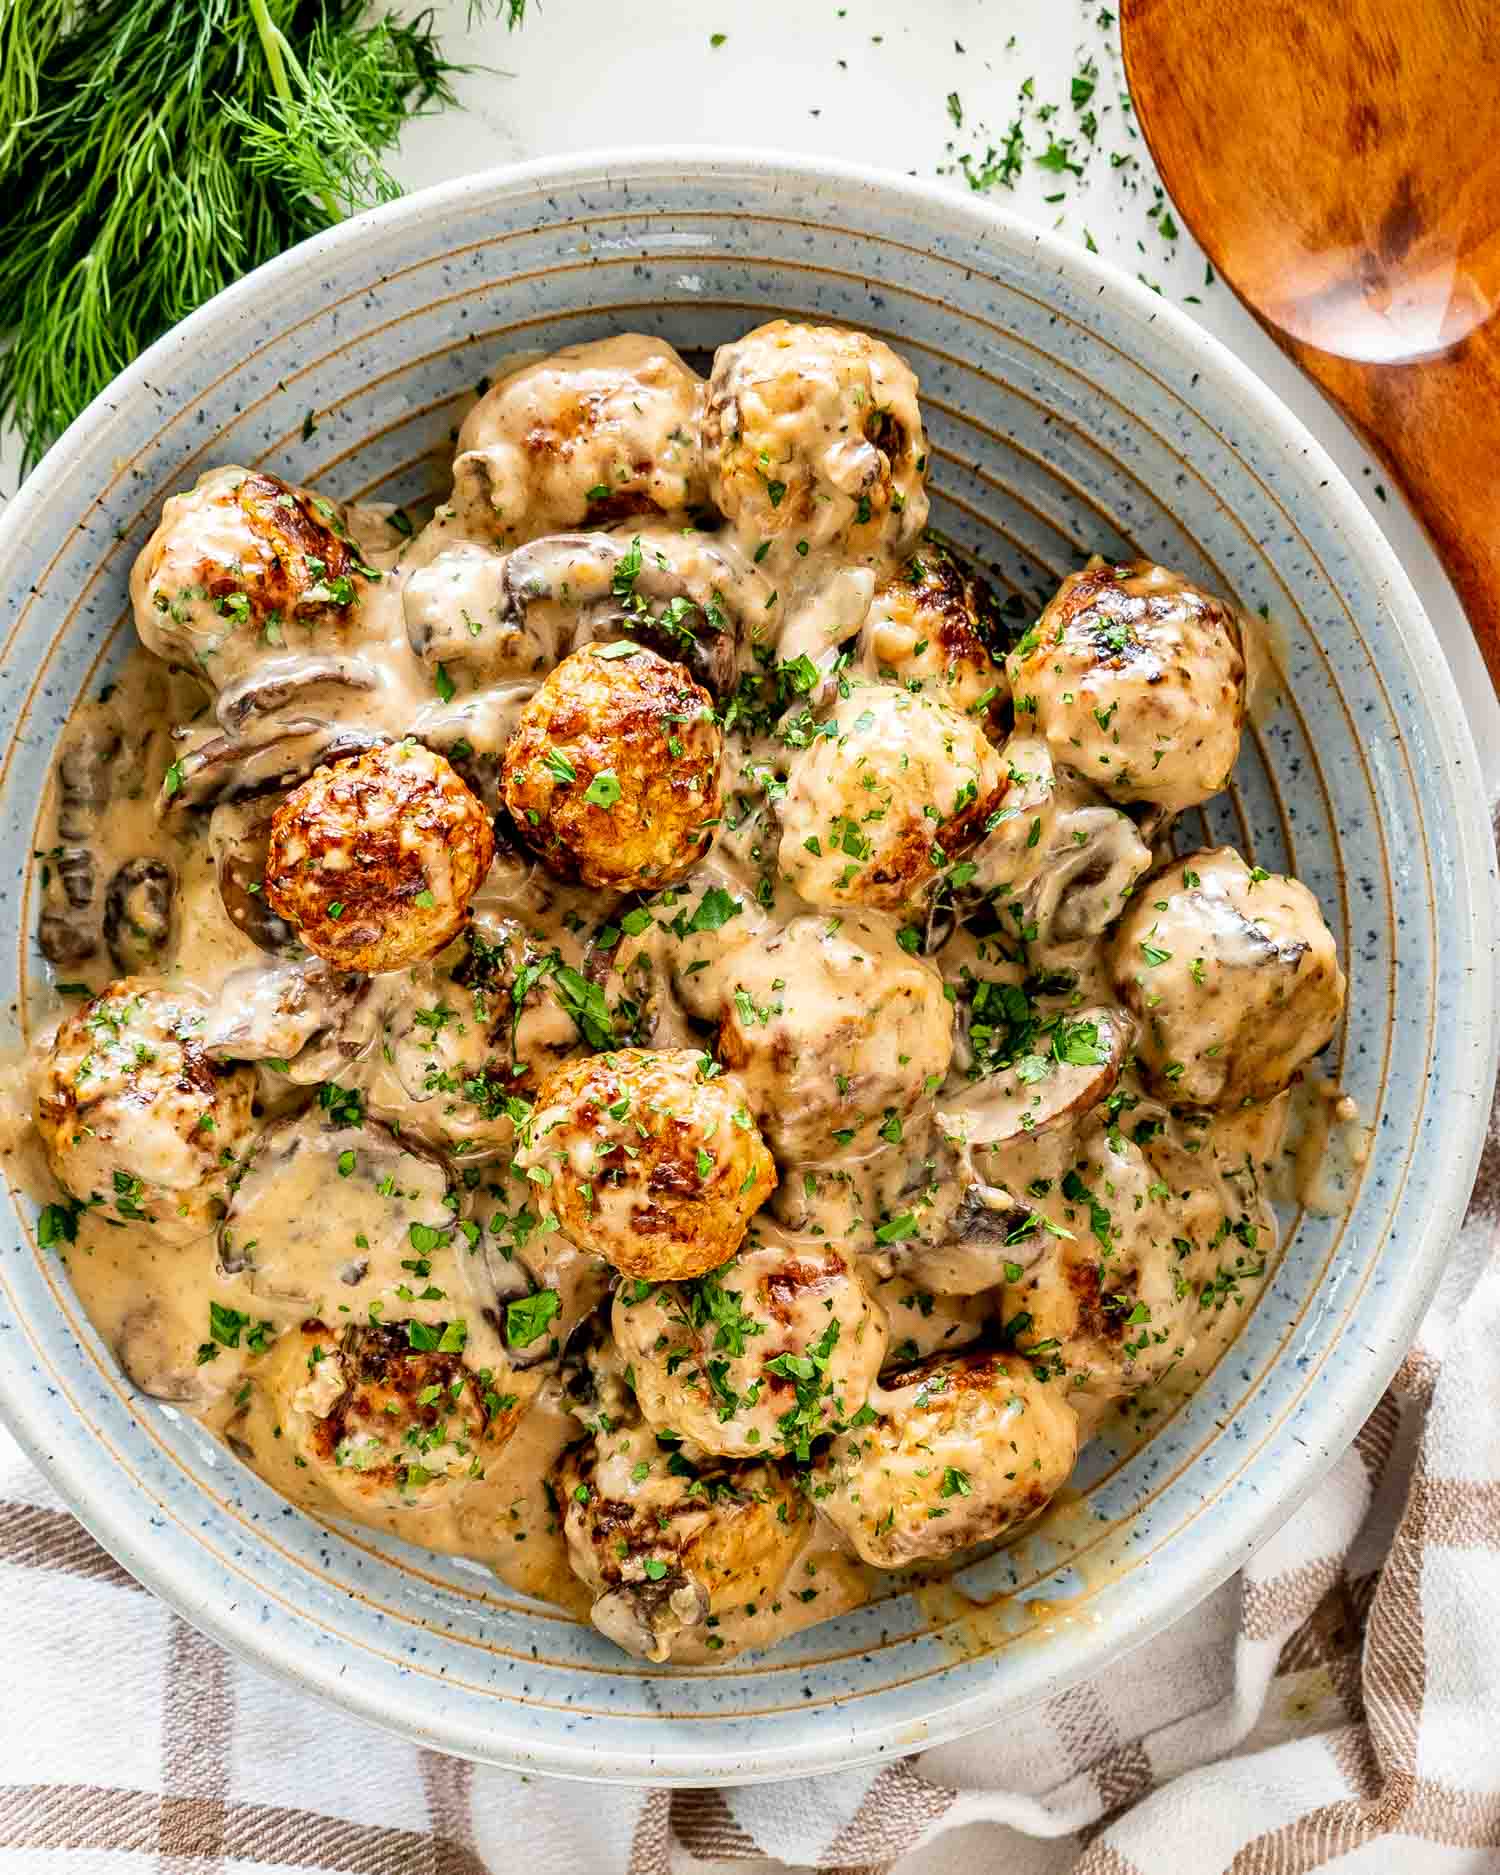 meatballs with mushrooms gravy in a bowl.